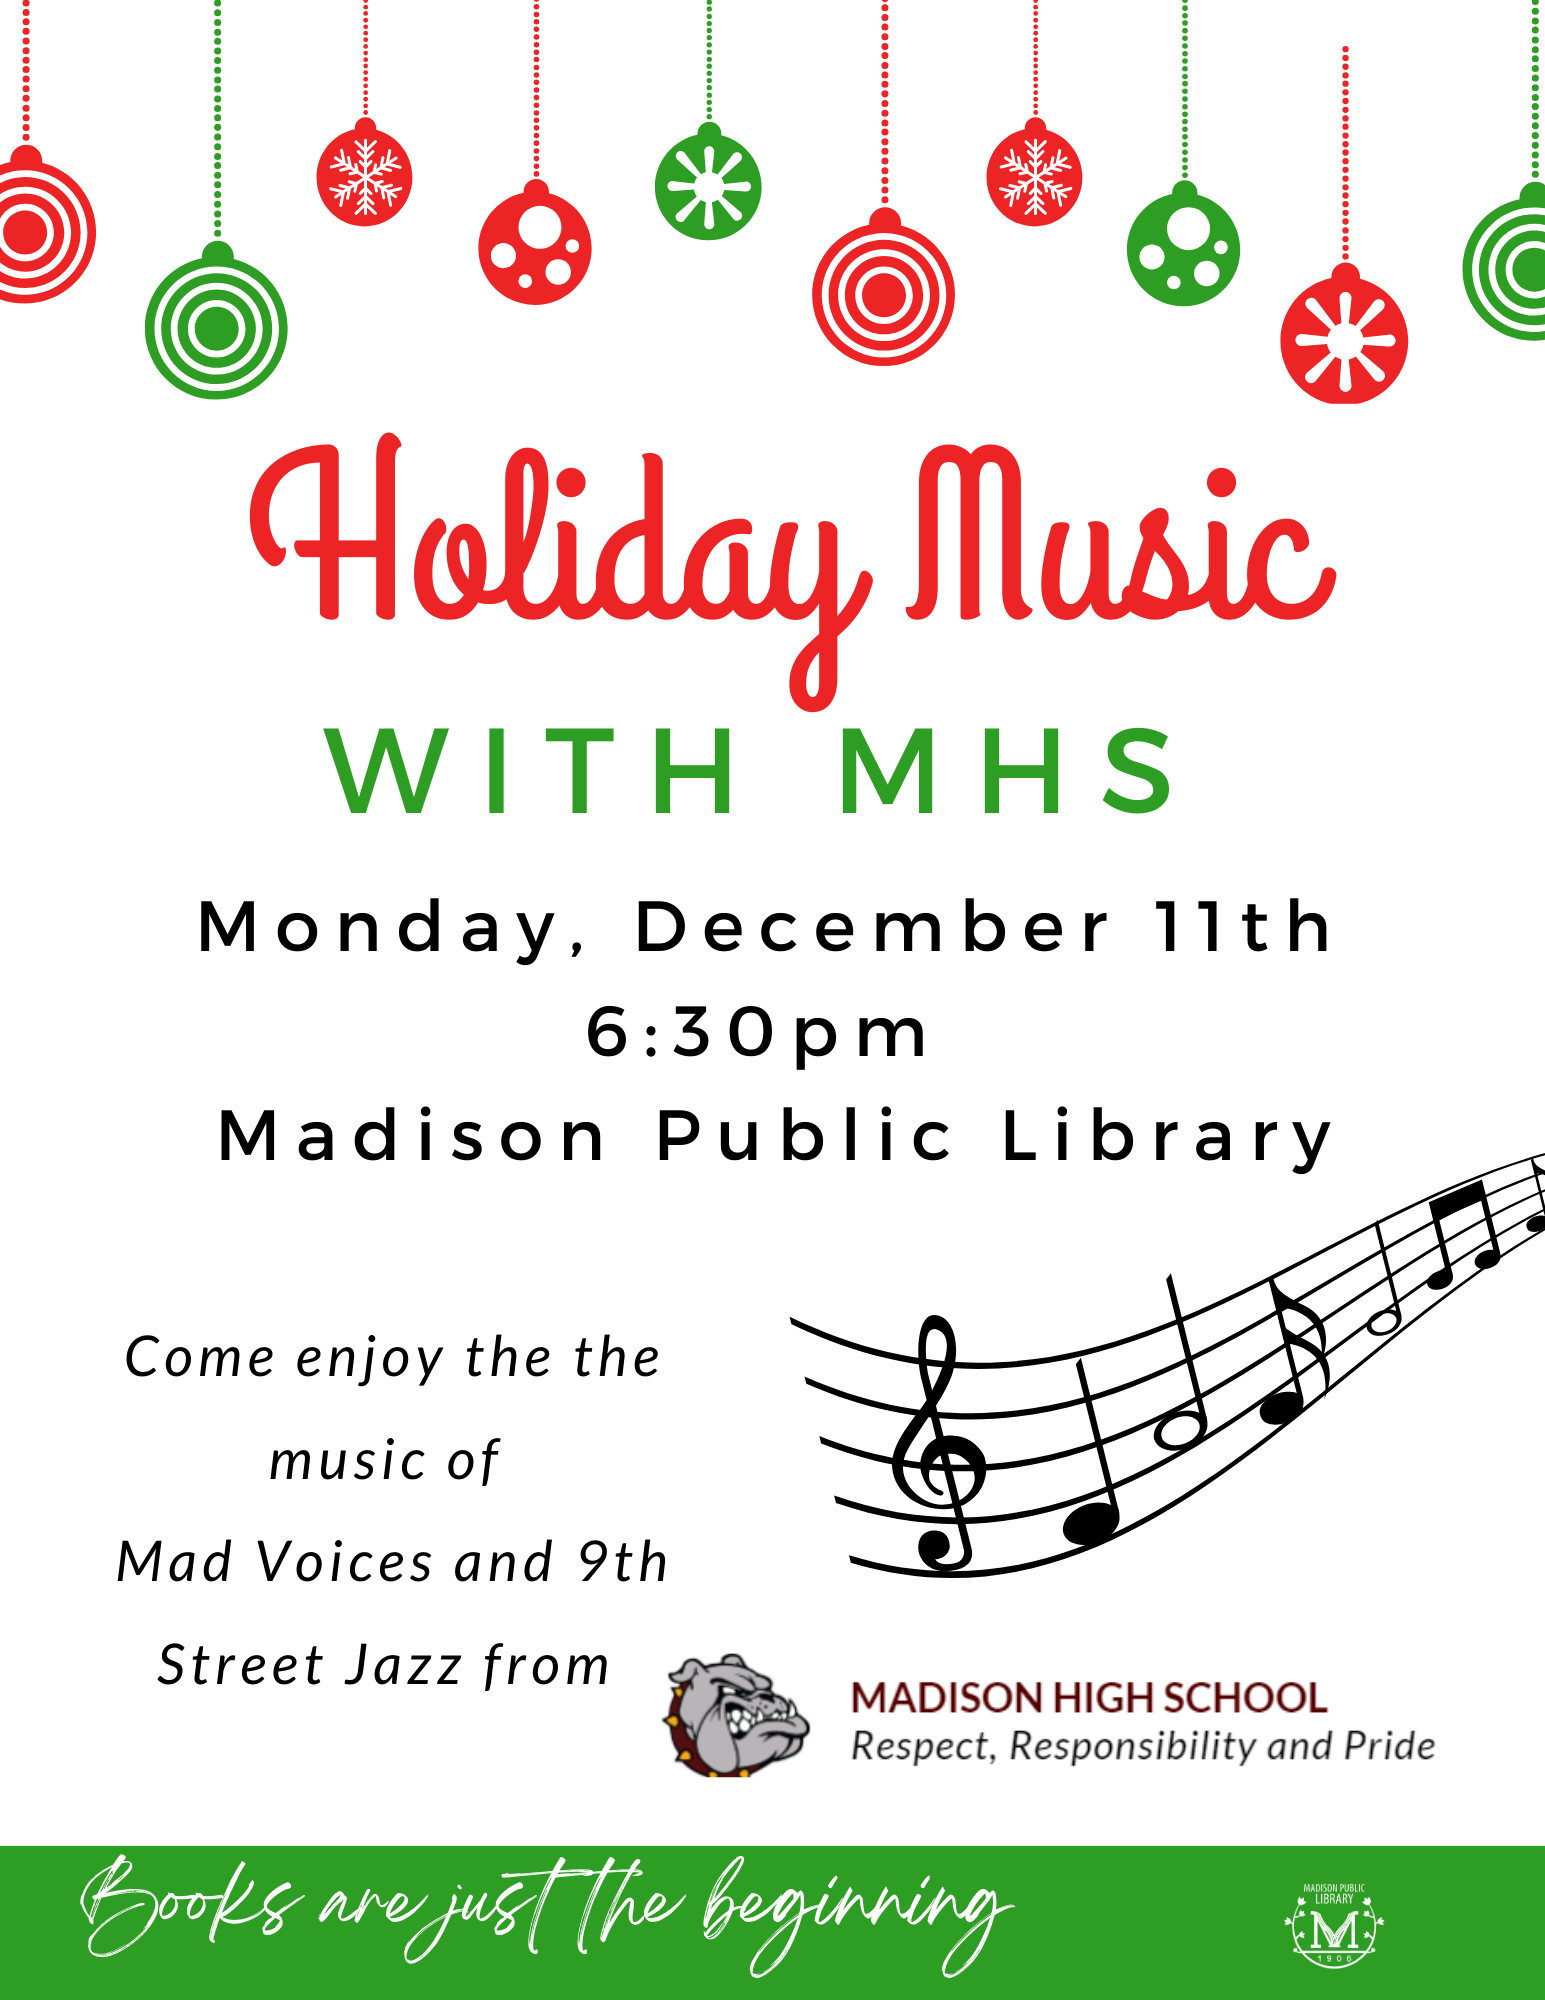 <h1 class="tribe-events-single-event-title">Holiday Music with MHS</h1>